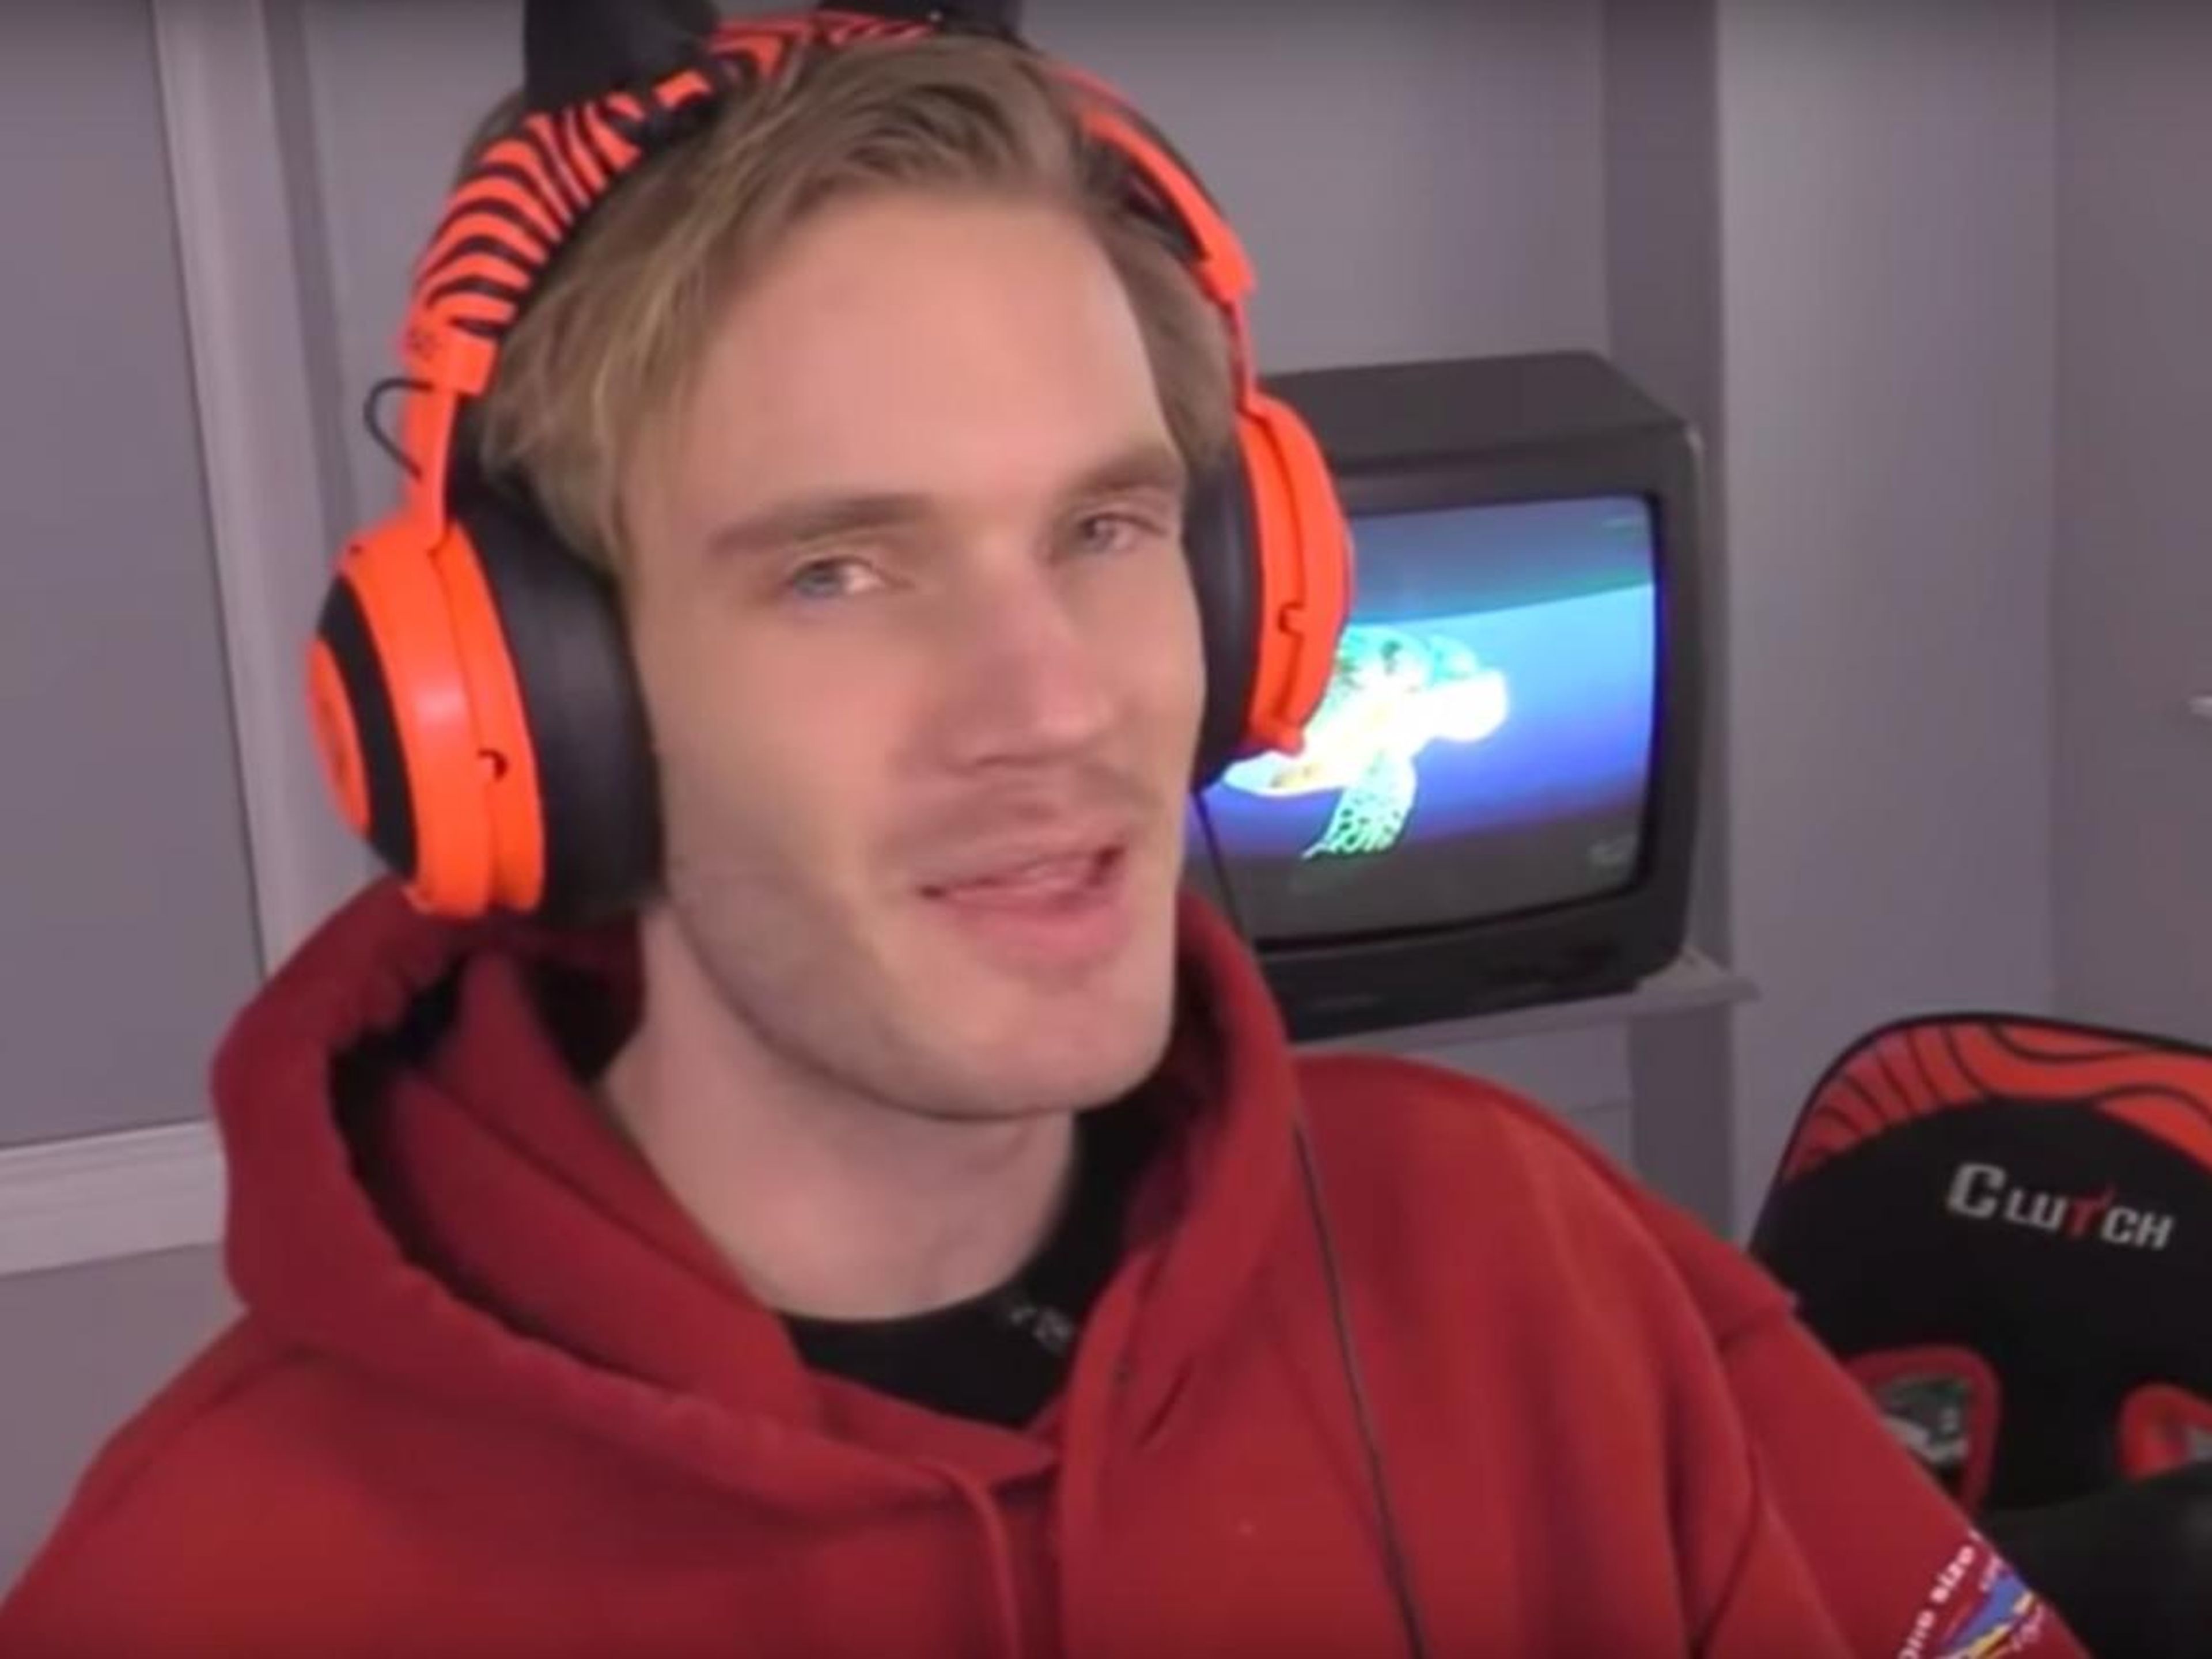 By 2014, Kjellberg made an estimated $7.4 million. That was up $3 million from his estimated earnings a year before, showing the incredible growth of his channel in just four years. Kjellberg said he was "extremely tired" of